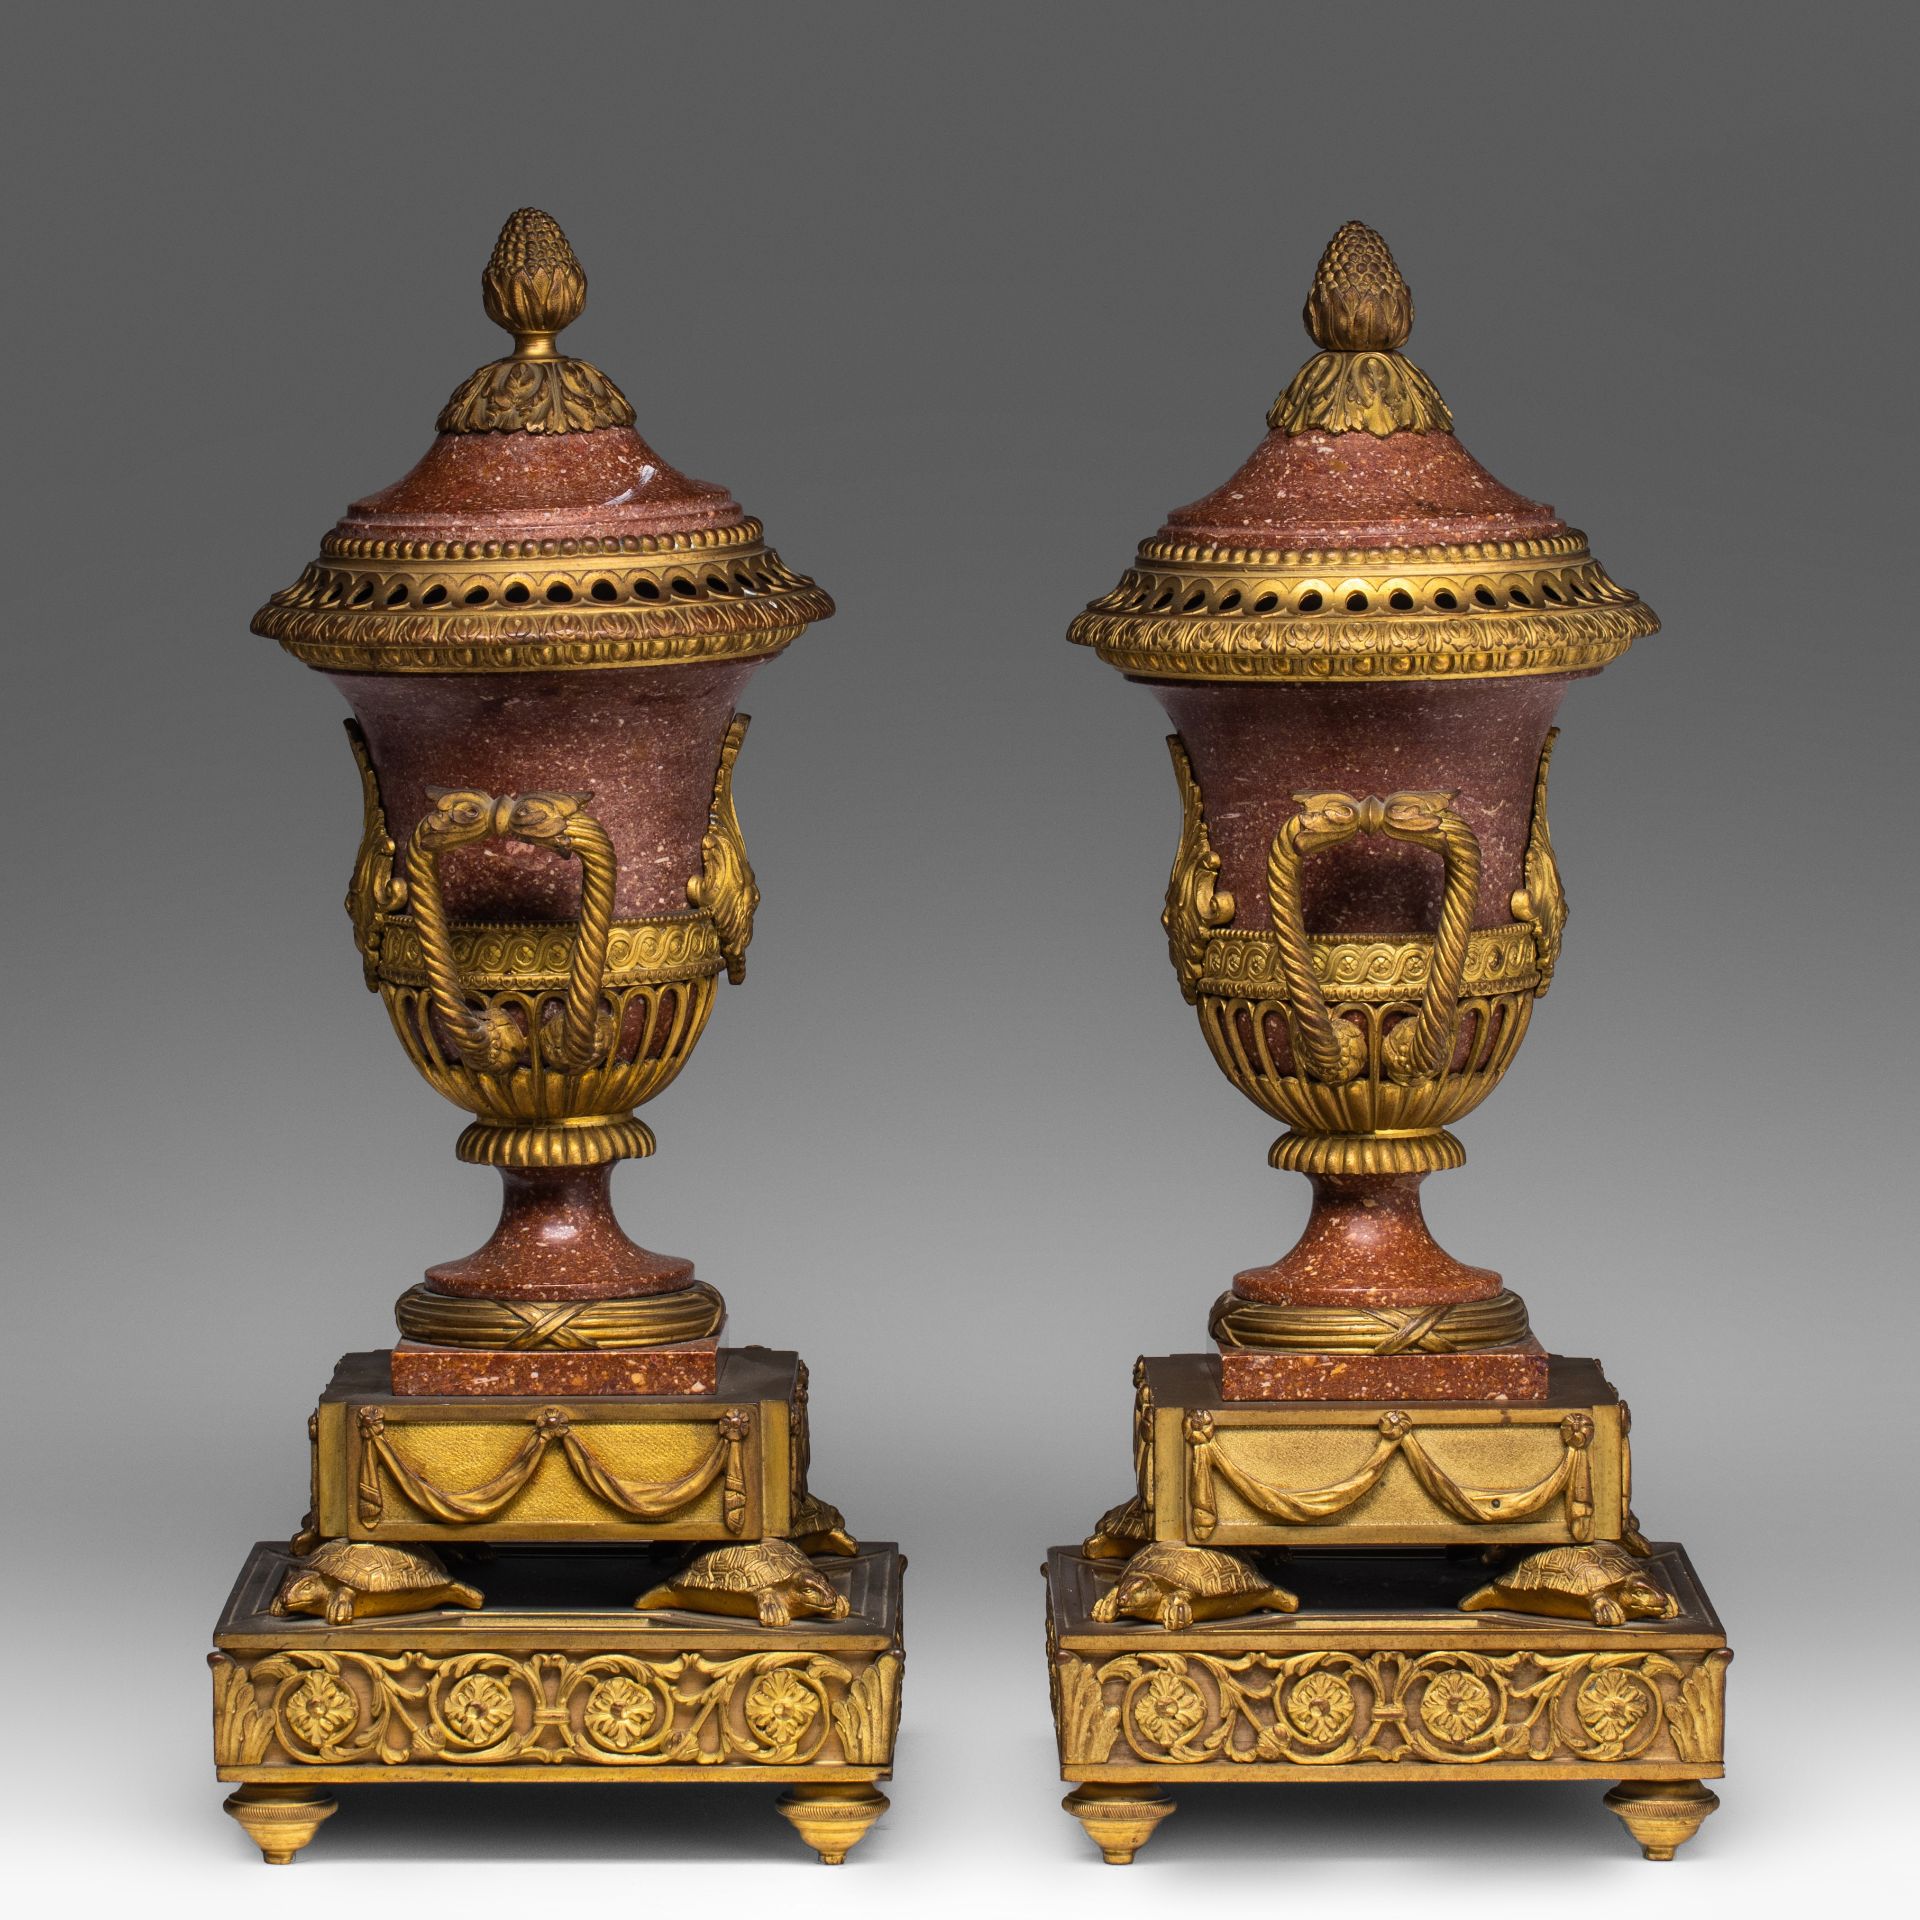 A pair of Neoclassical gilt bronze-mounted porphyry cassolettes, 19thC, H 35 cm - Image 2 of 8